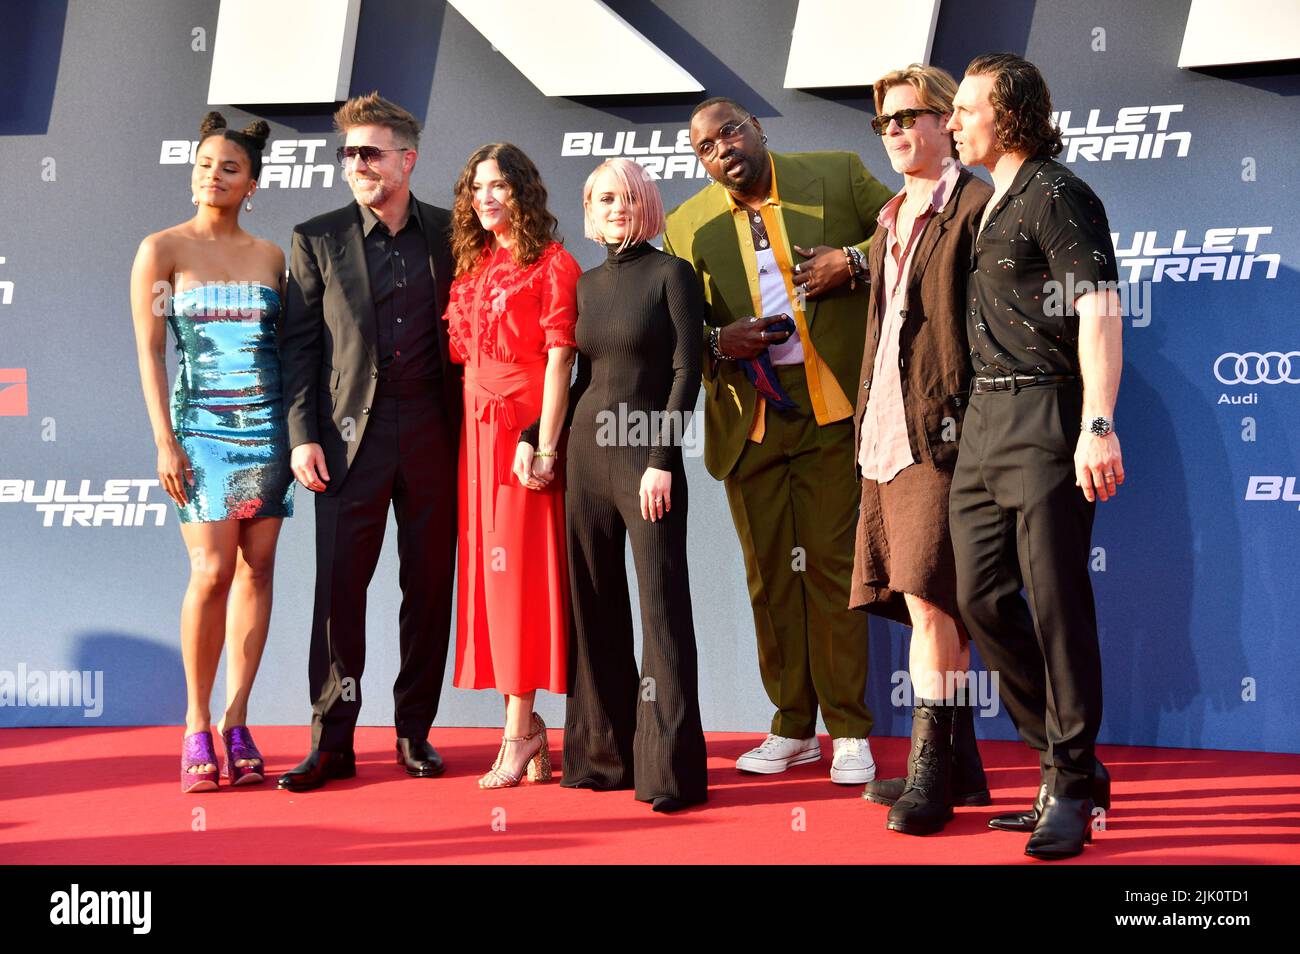 Zazie Beetz, David Leitch, Kelly McCormick, Joey King, Brian Tyree Henry, Brad Pitt and Aaron Taylor-Johnson attend the 'Bullet Train' Special Screening at Zoo Palast on July 19, 2022 in Berlin, Germany. Stock Photo